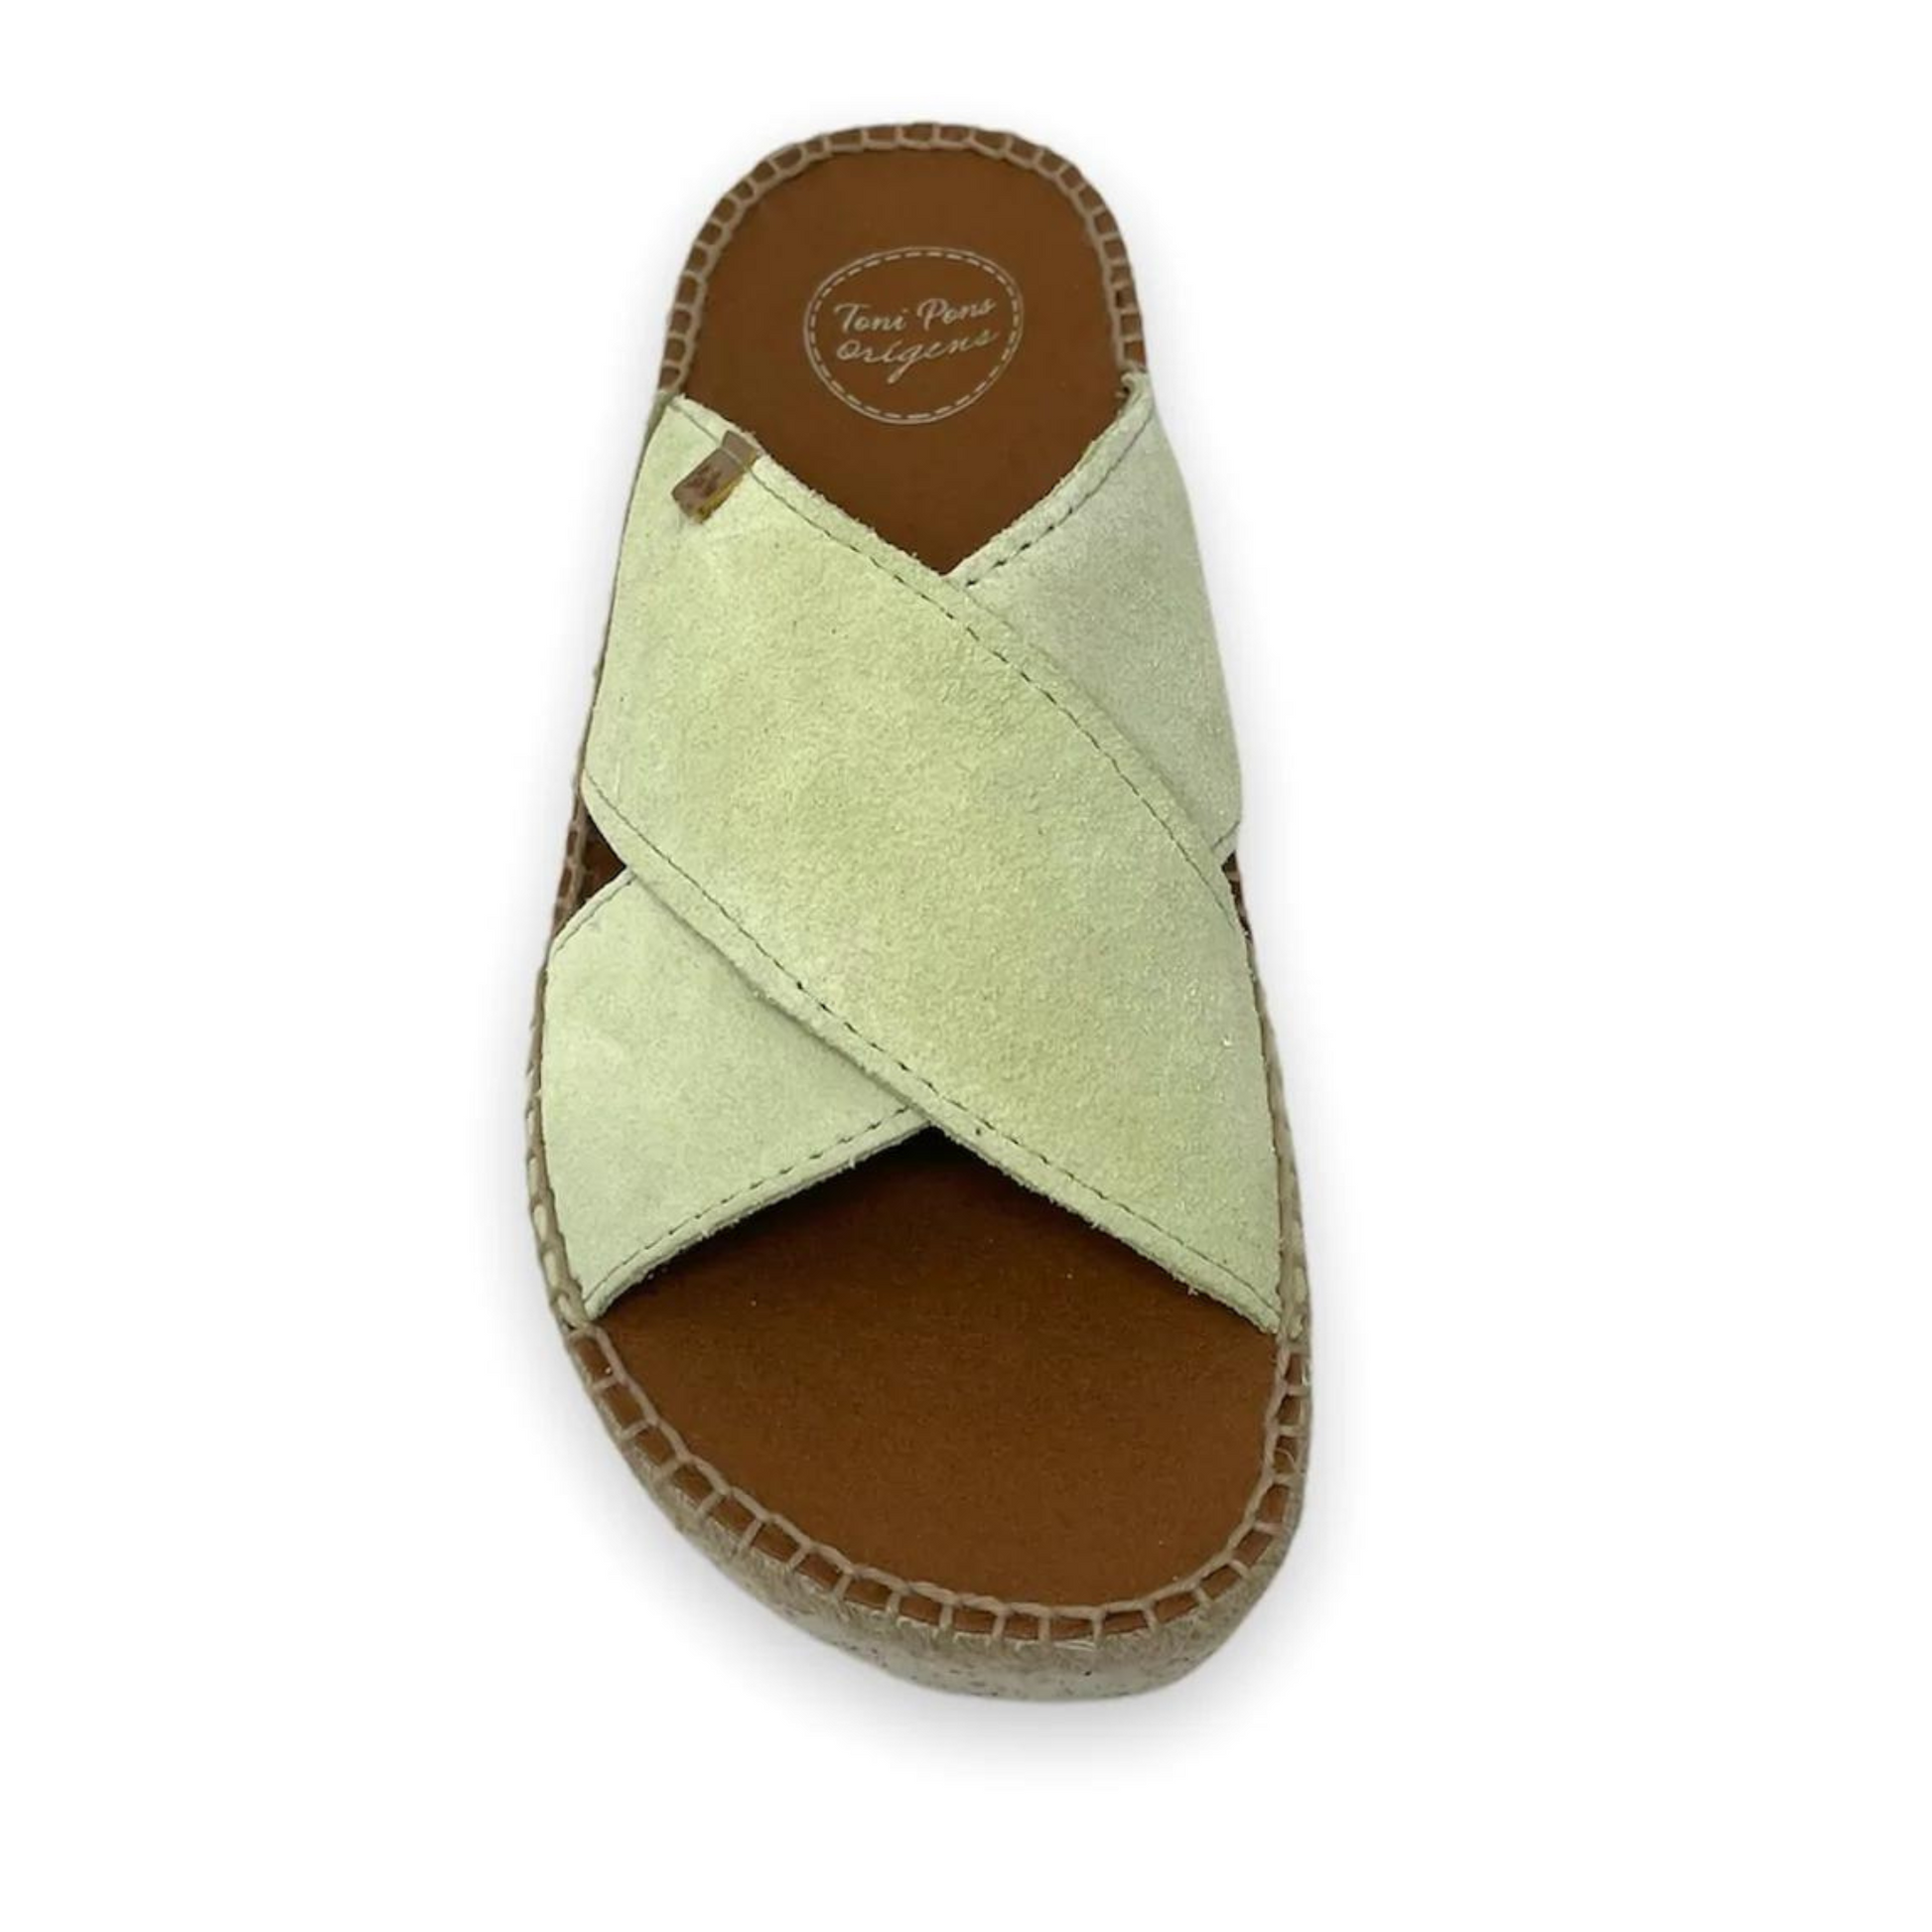 A front view of the sandal in the lima colour, showing the crossed straps and the insole.